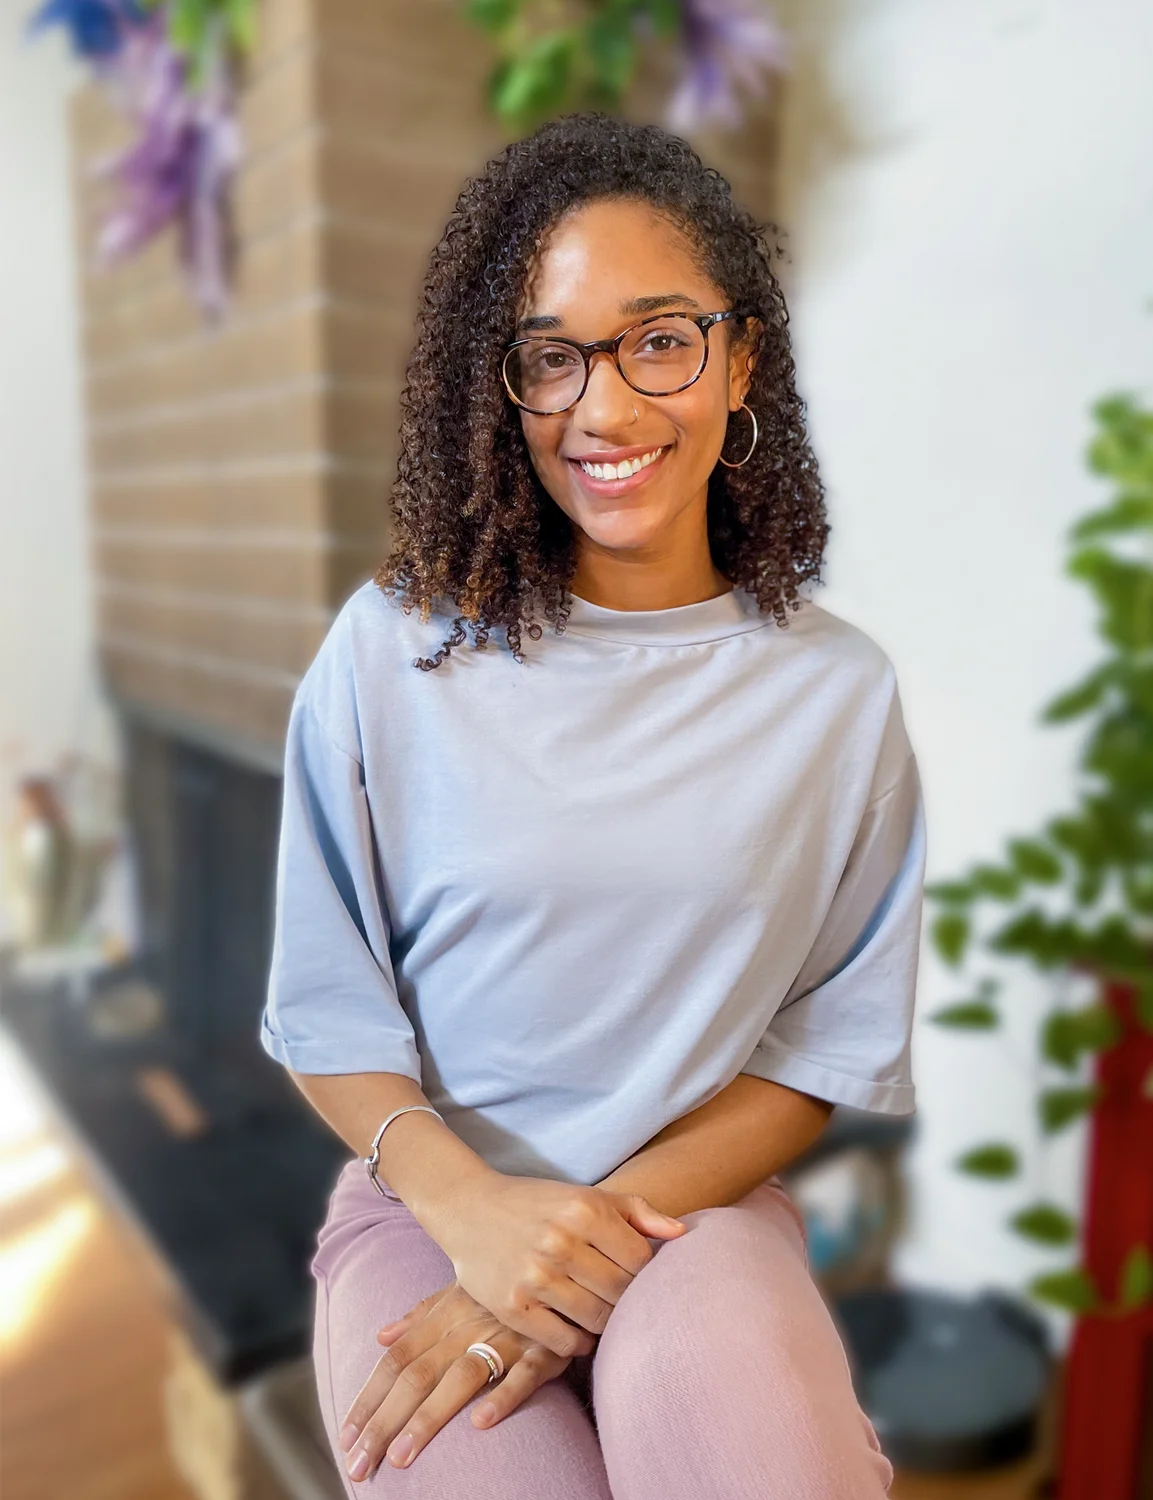 Candice Speicher smiles at the camera while seated in a gray blouse and mauve pants. She wears glasses and hoop earrings.